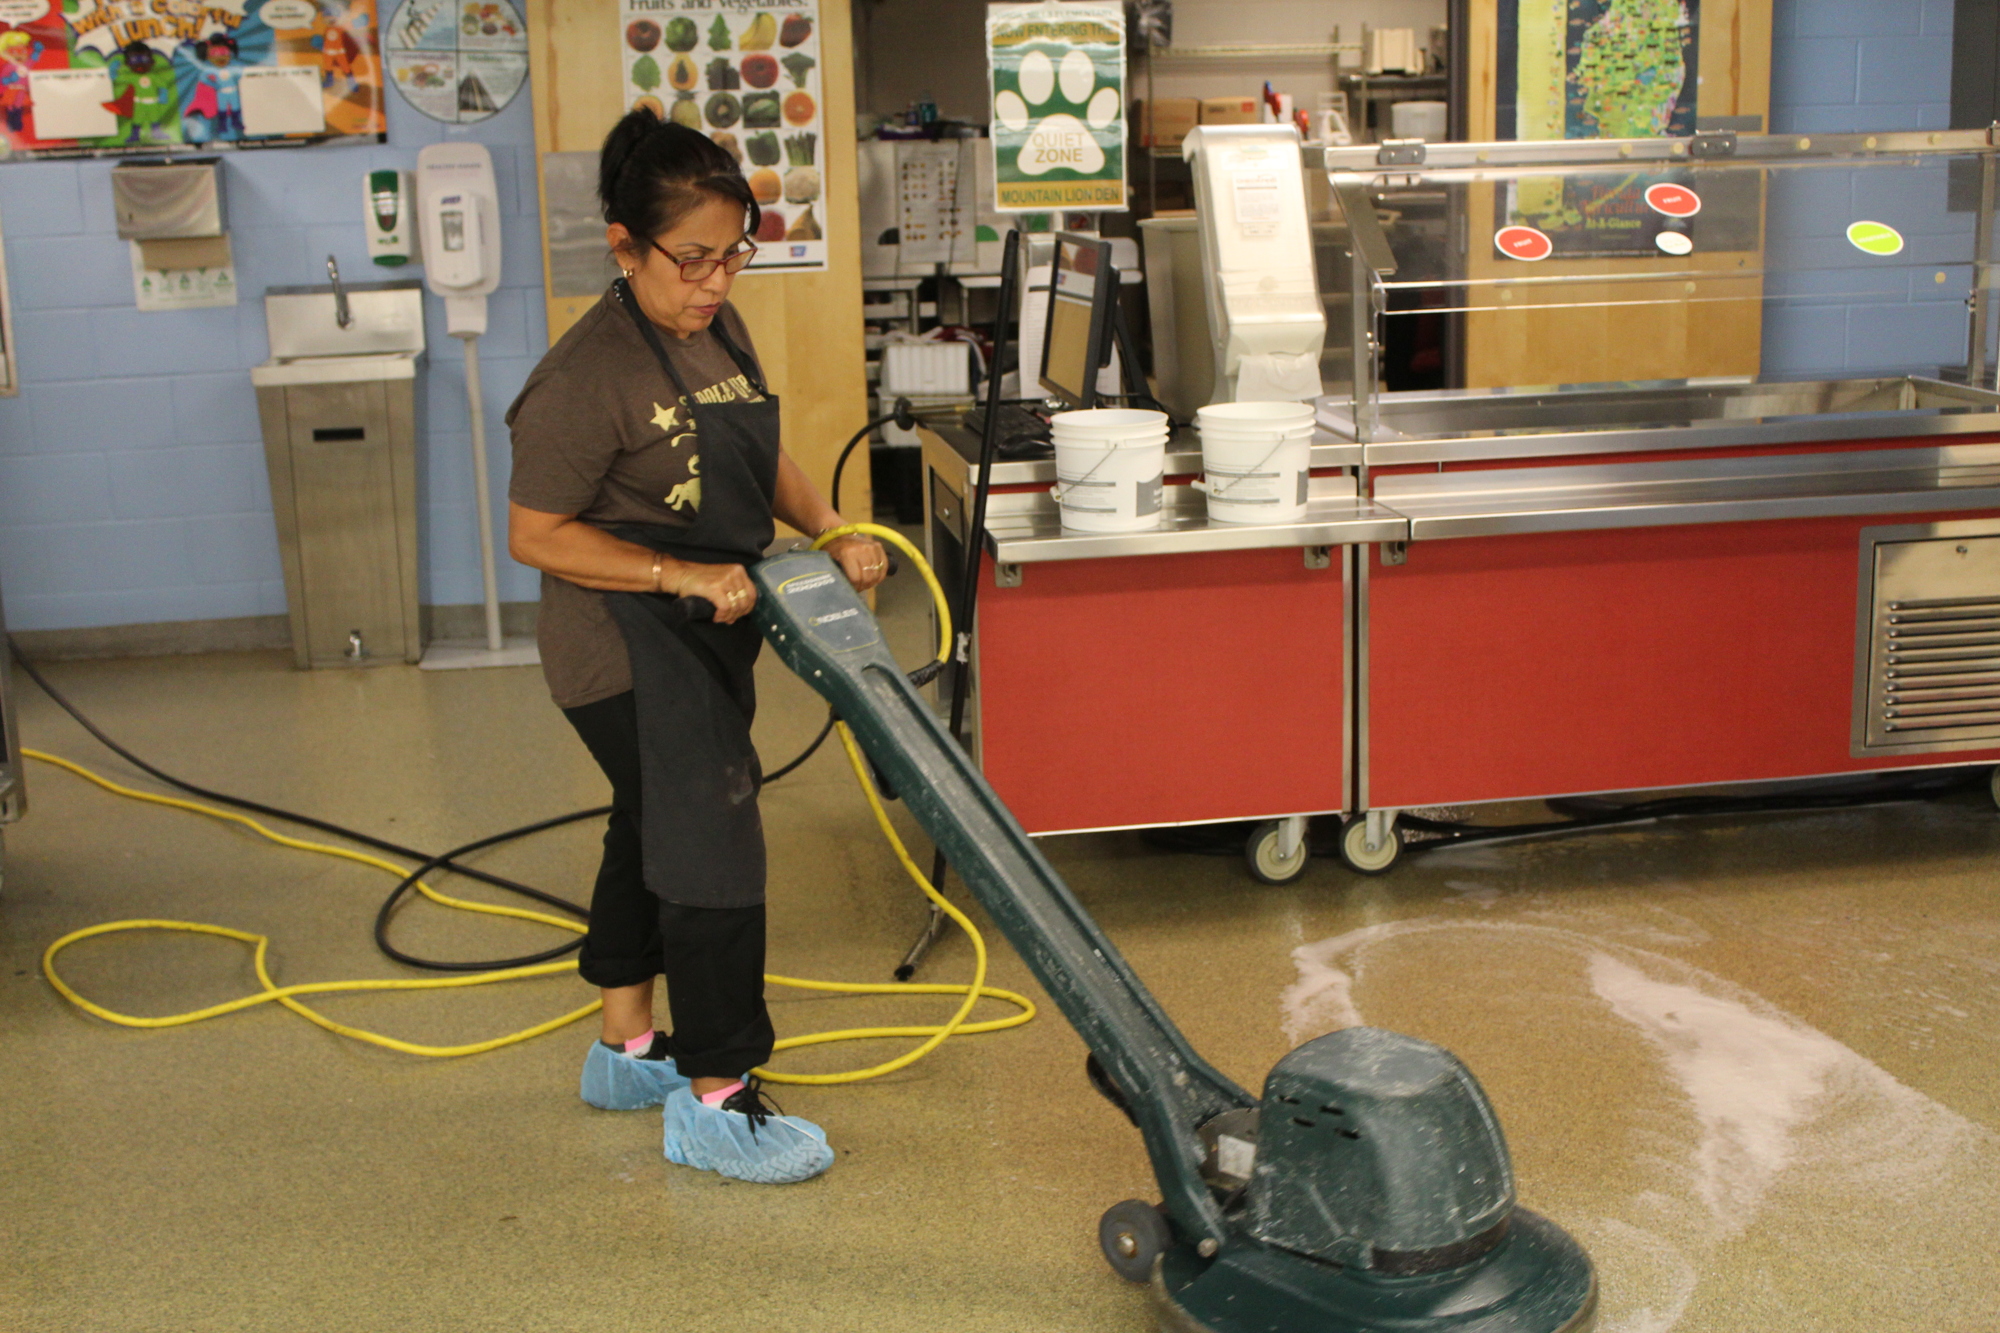 Virgil Mills Elementary served as a shelter during Hurricane Irma. School Assistant Cafeteria Manager Adela Garza cleaned the floors after evacuees returned home.